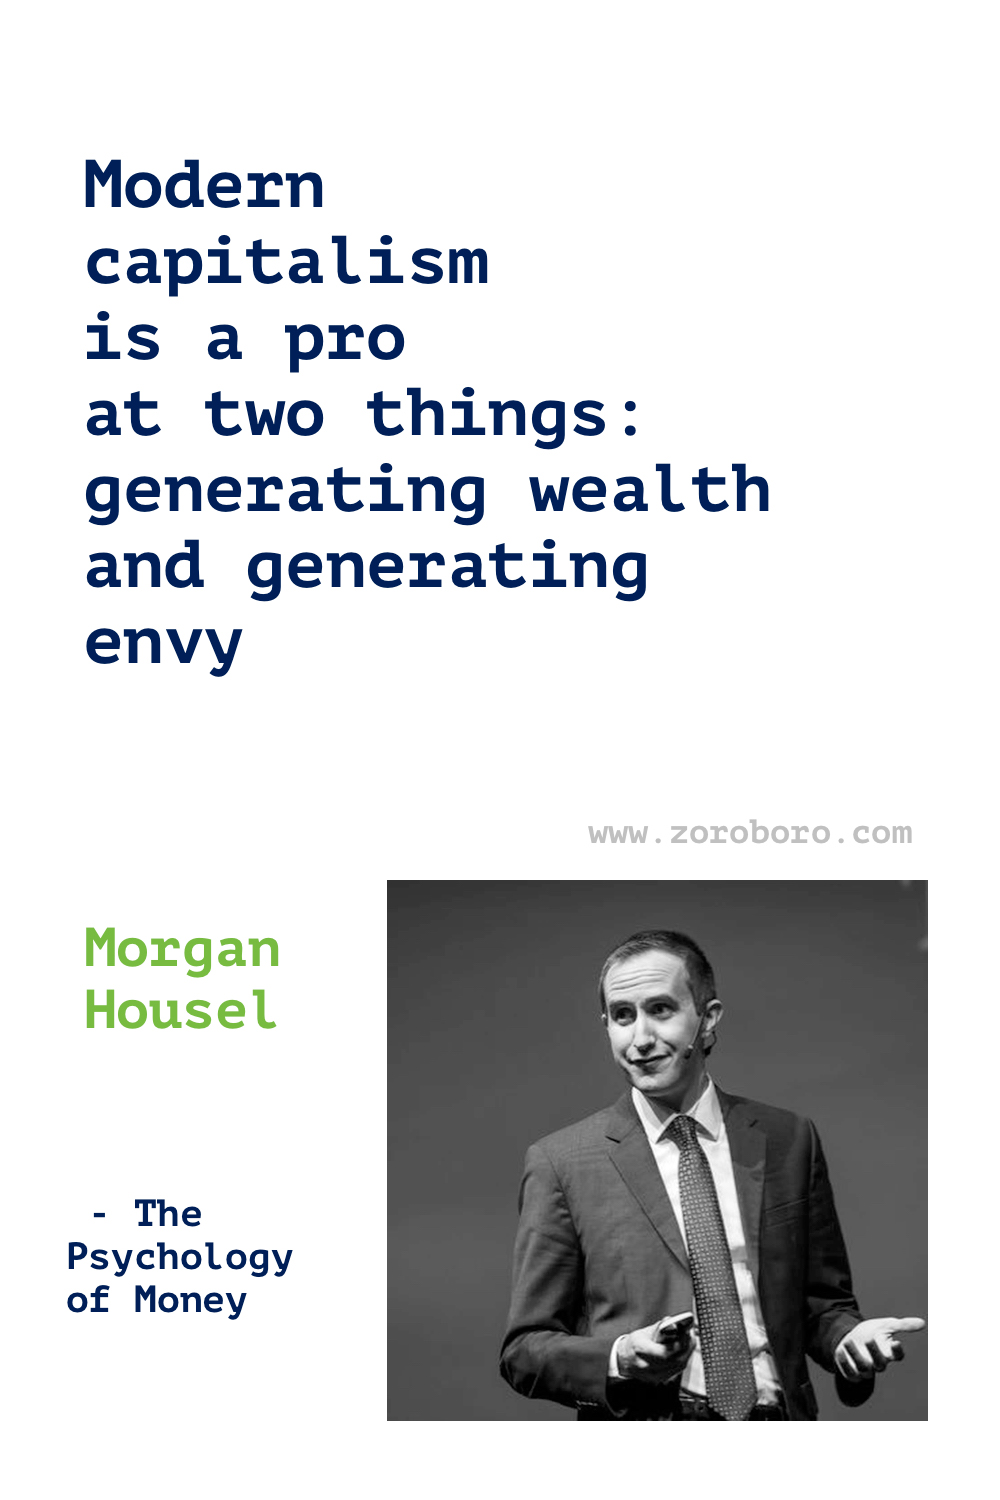 Morgan Housel Quotes, The Psychology of Money Quotes, wealth, greed, and happiness Quotes, Morgan Housel Books Quotes, Morgan Housel Quotes On Money.